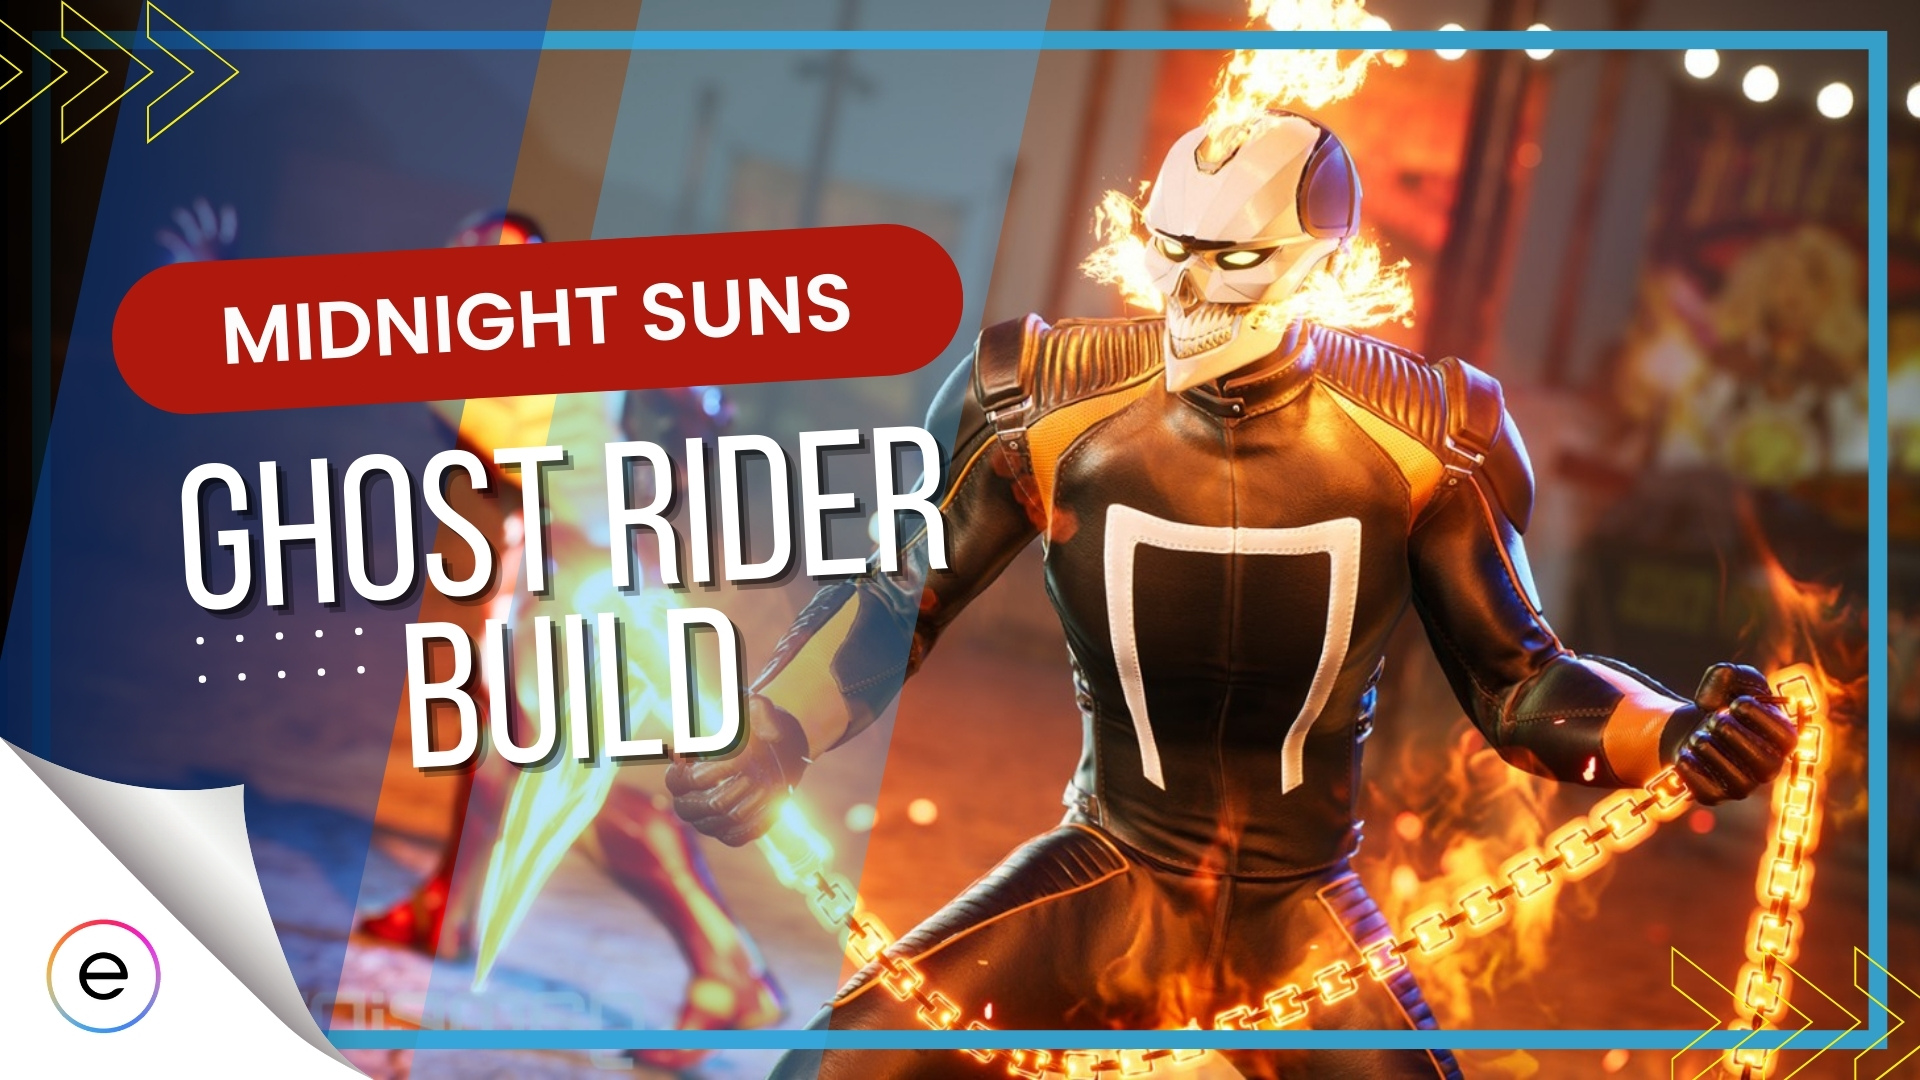 Midnight Suns Ghost Rider Build Guide: How to use Ghost Rider - Fextralife